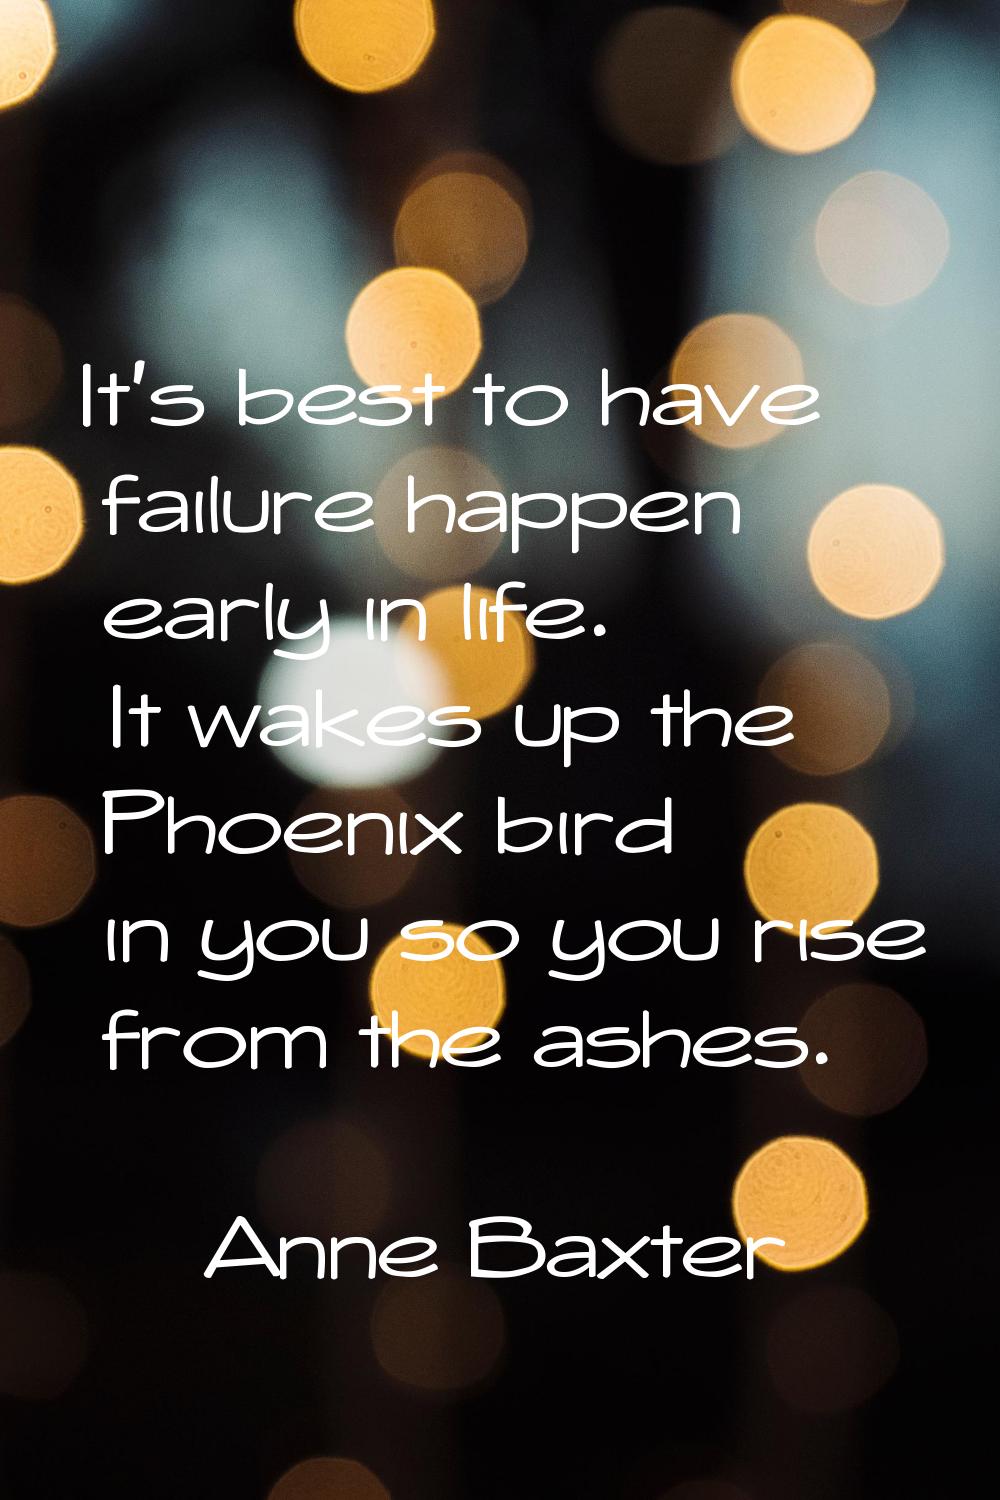 It's best to have failure happen early in life. It wakes up the Phoenix bird in you so you rise fro